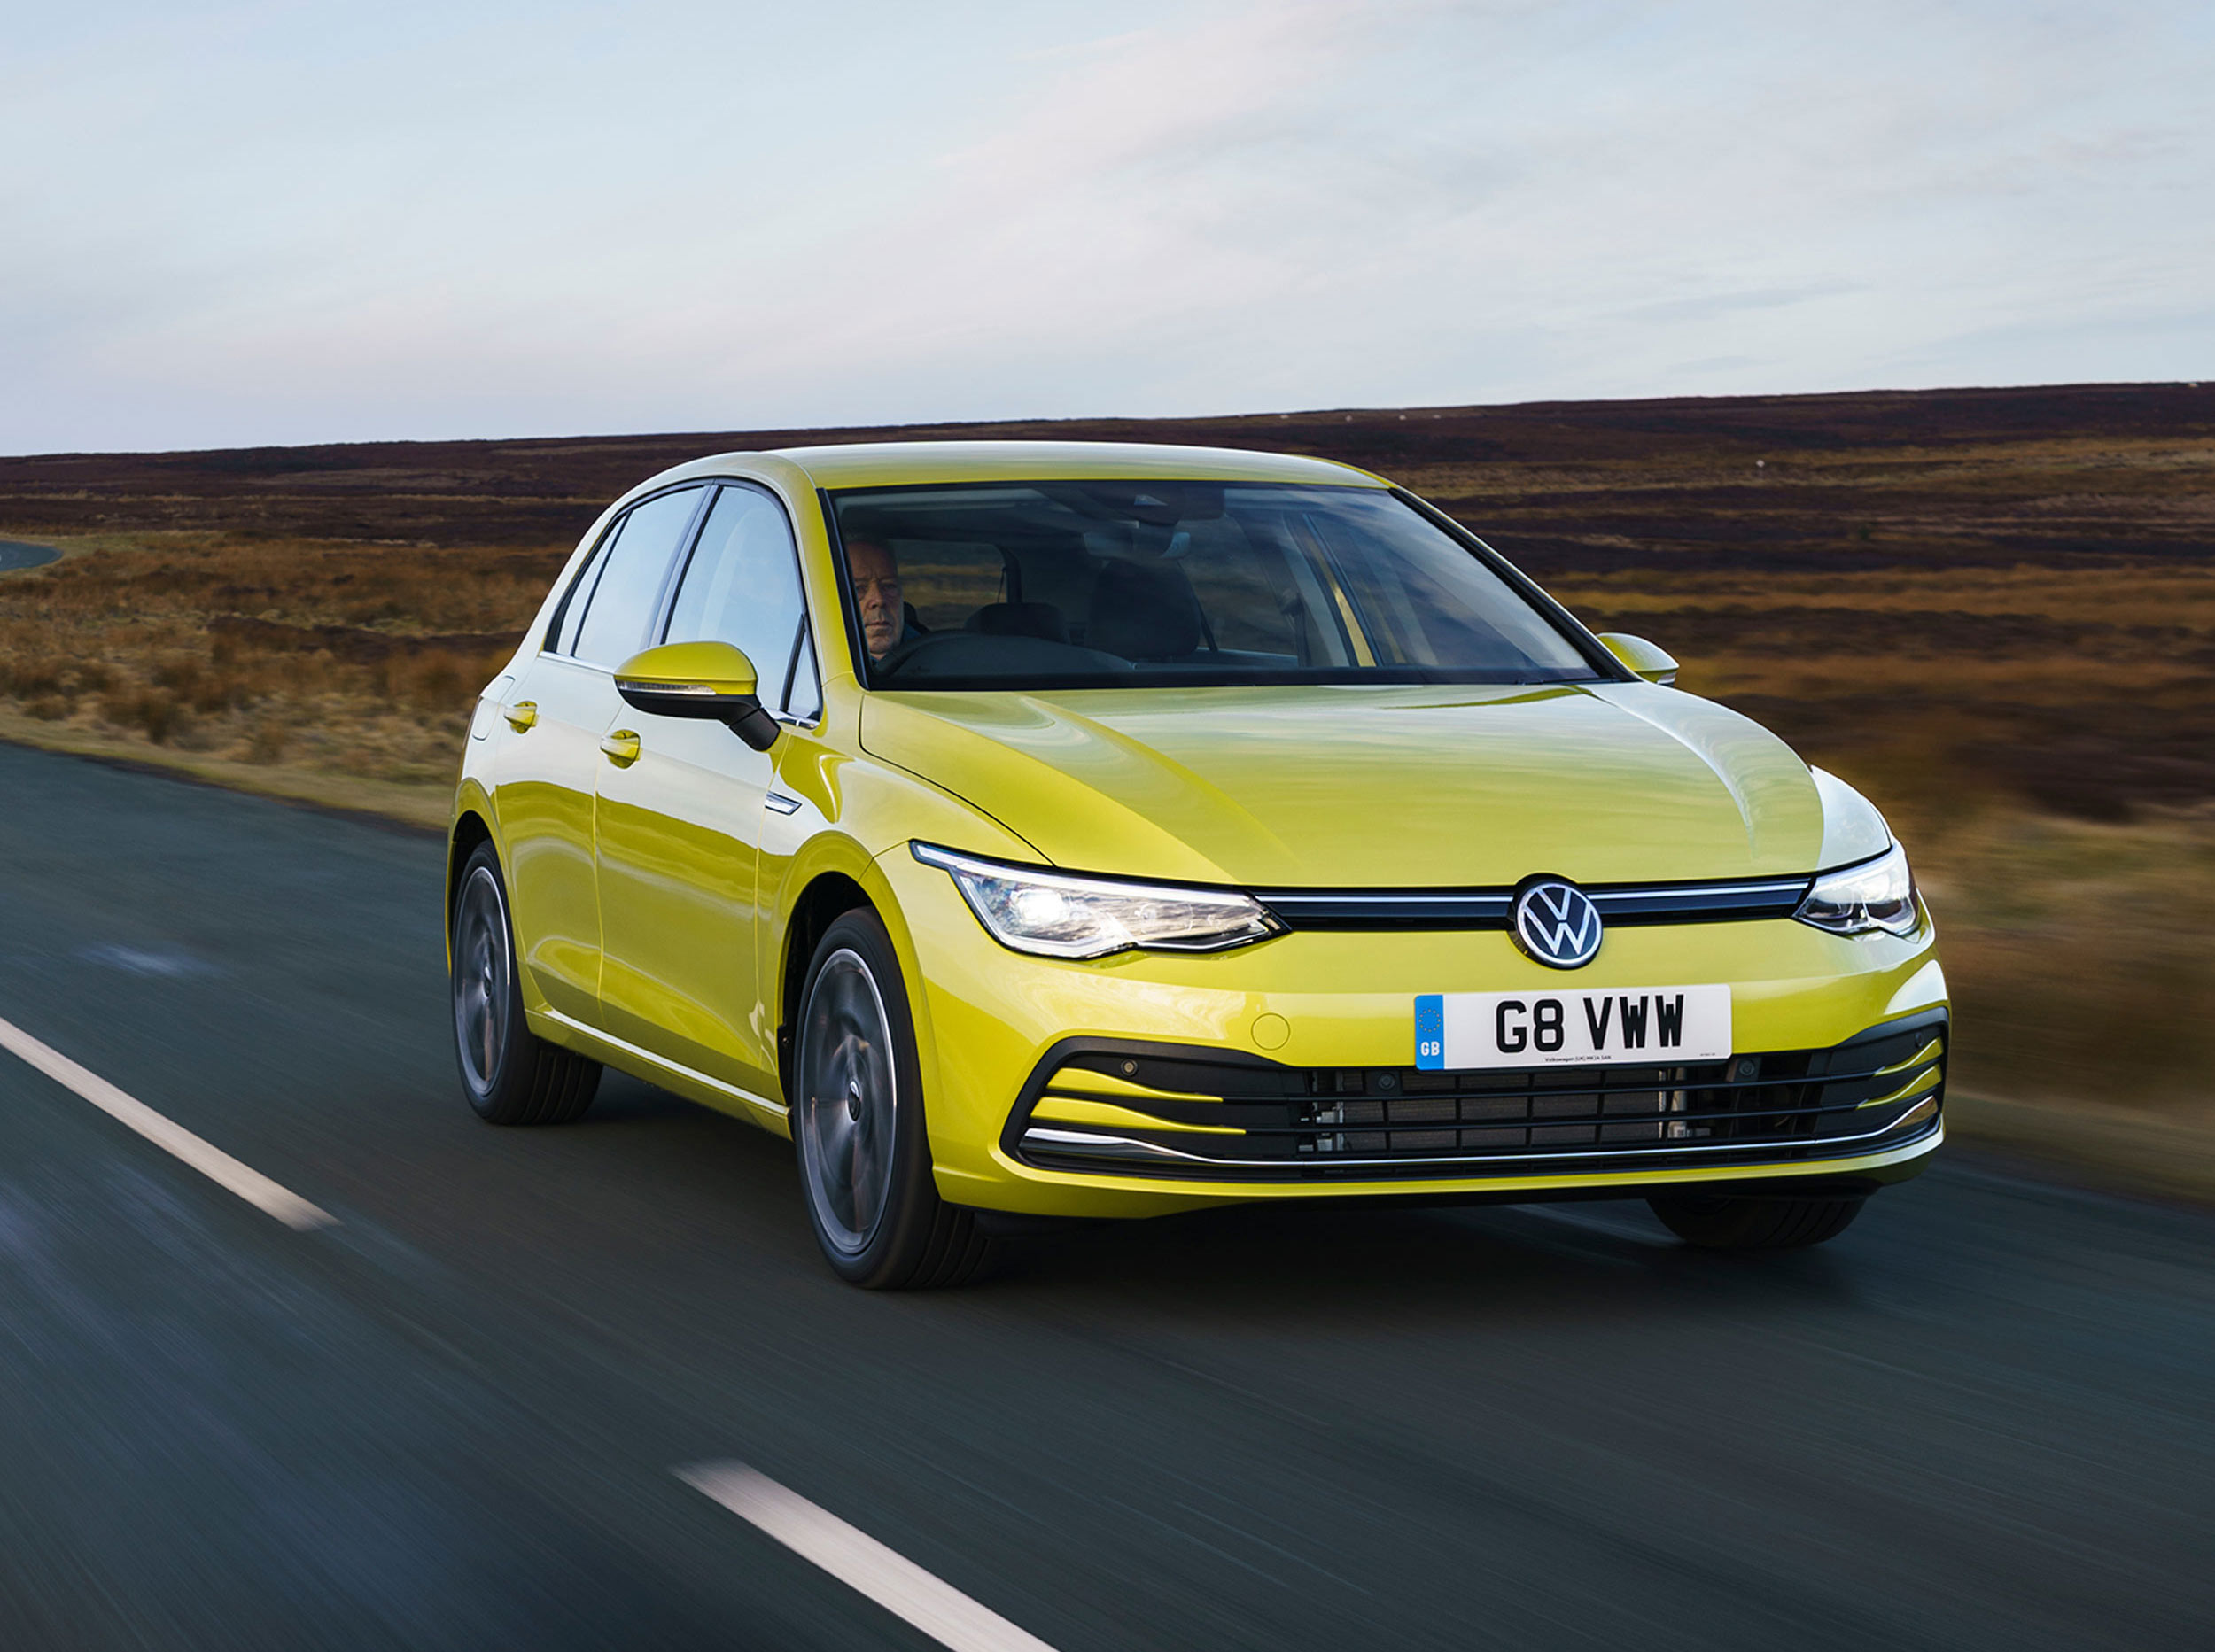 VW takes number one spot for the most popular car brand of 2021